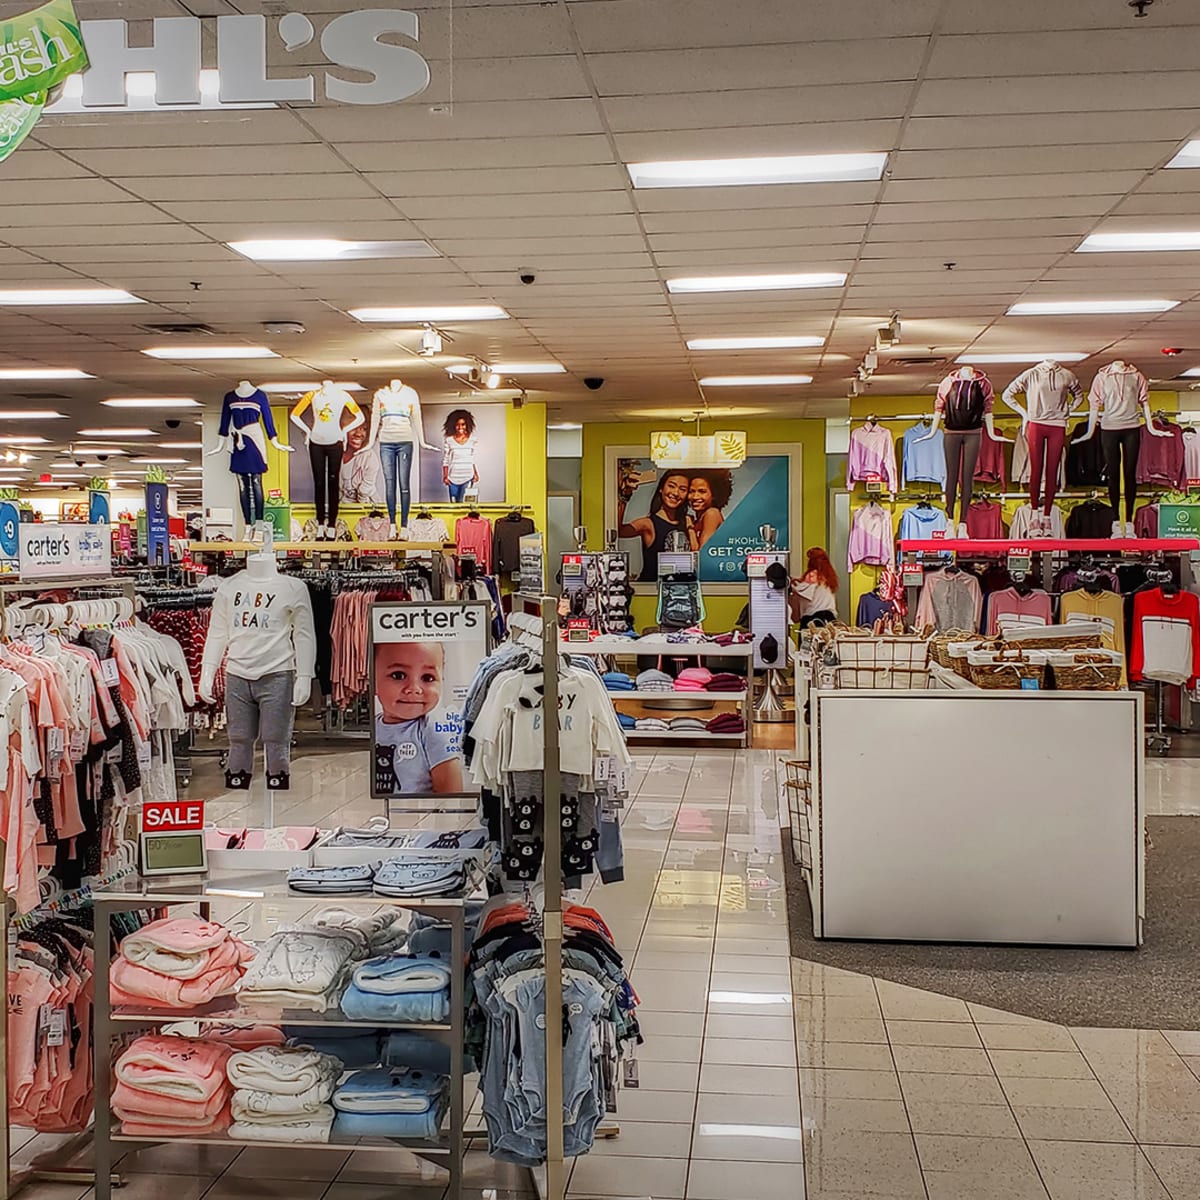 After Failed Sale, Kohl's Tries Something New In Its Stores - TheStreet